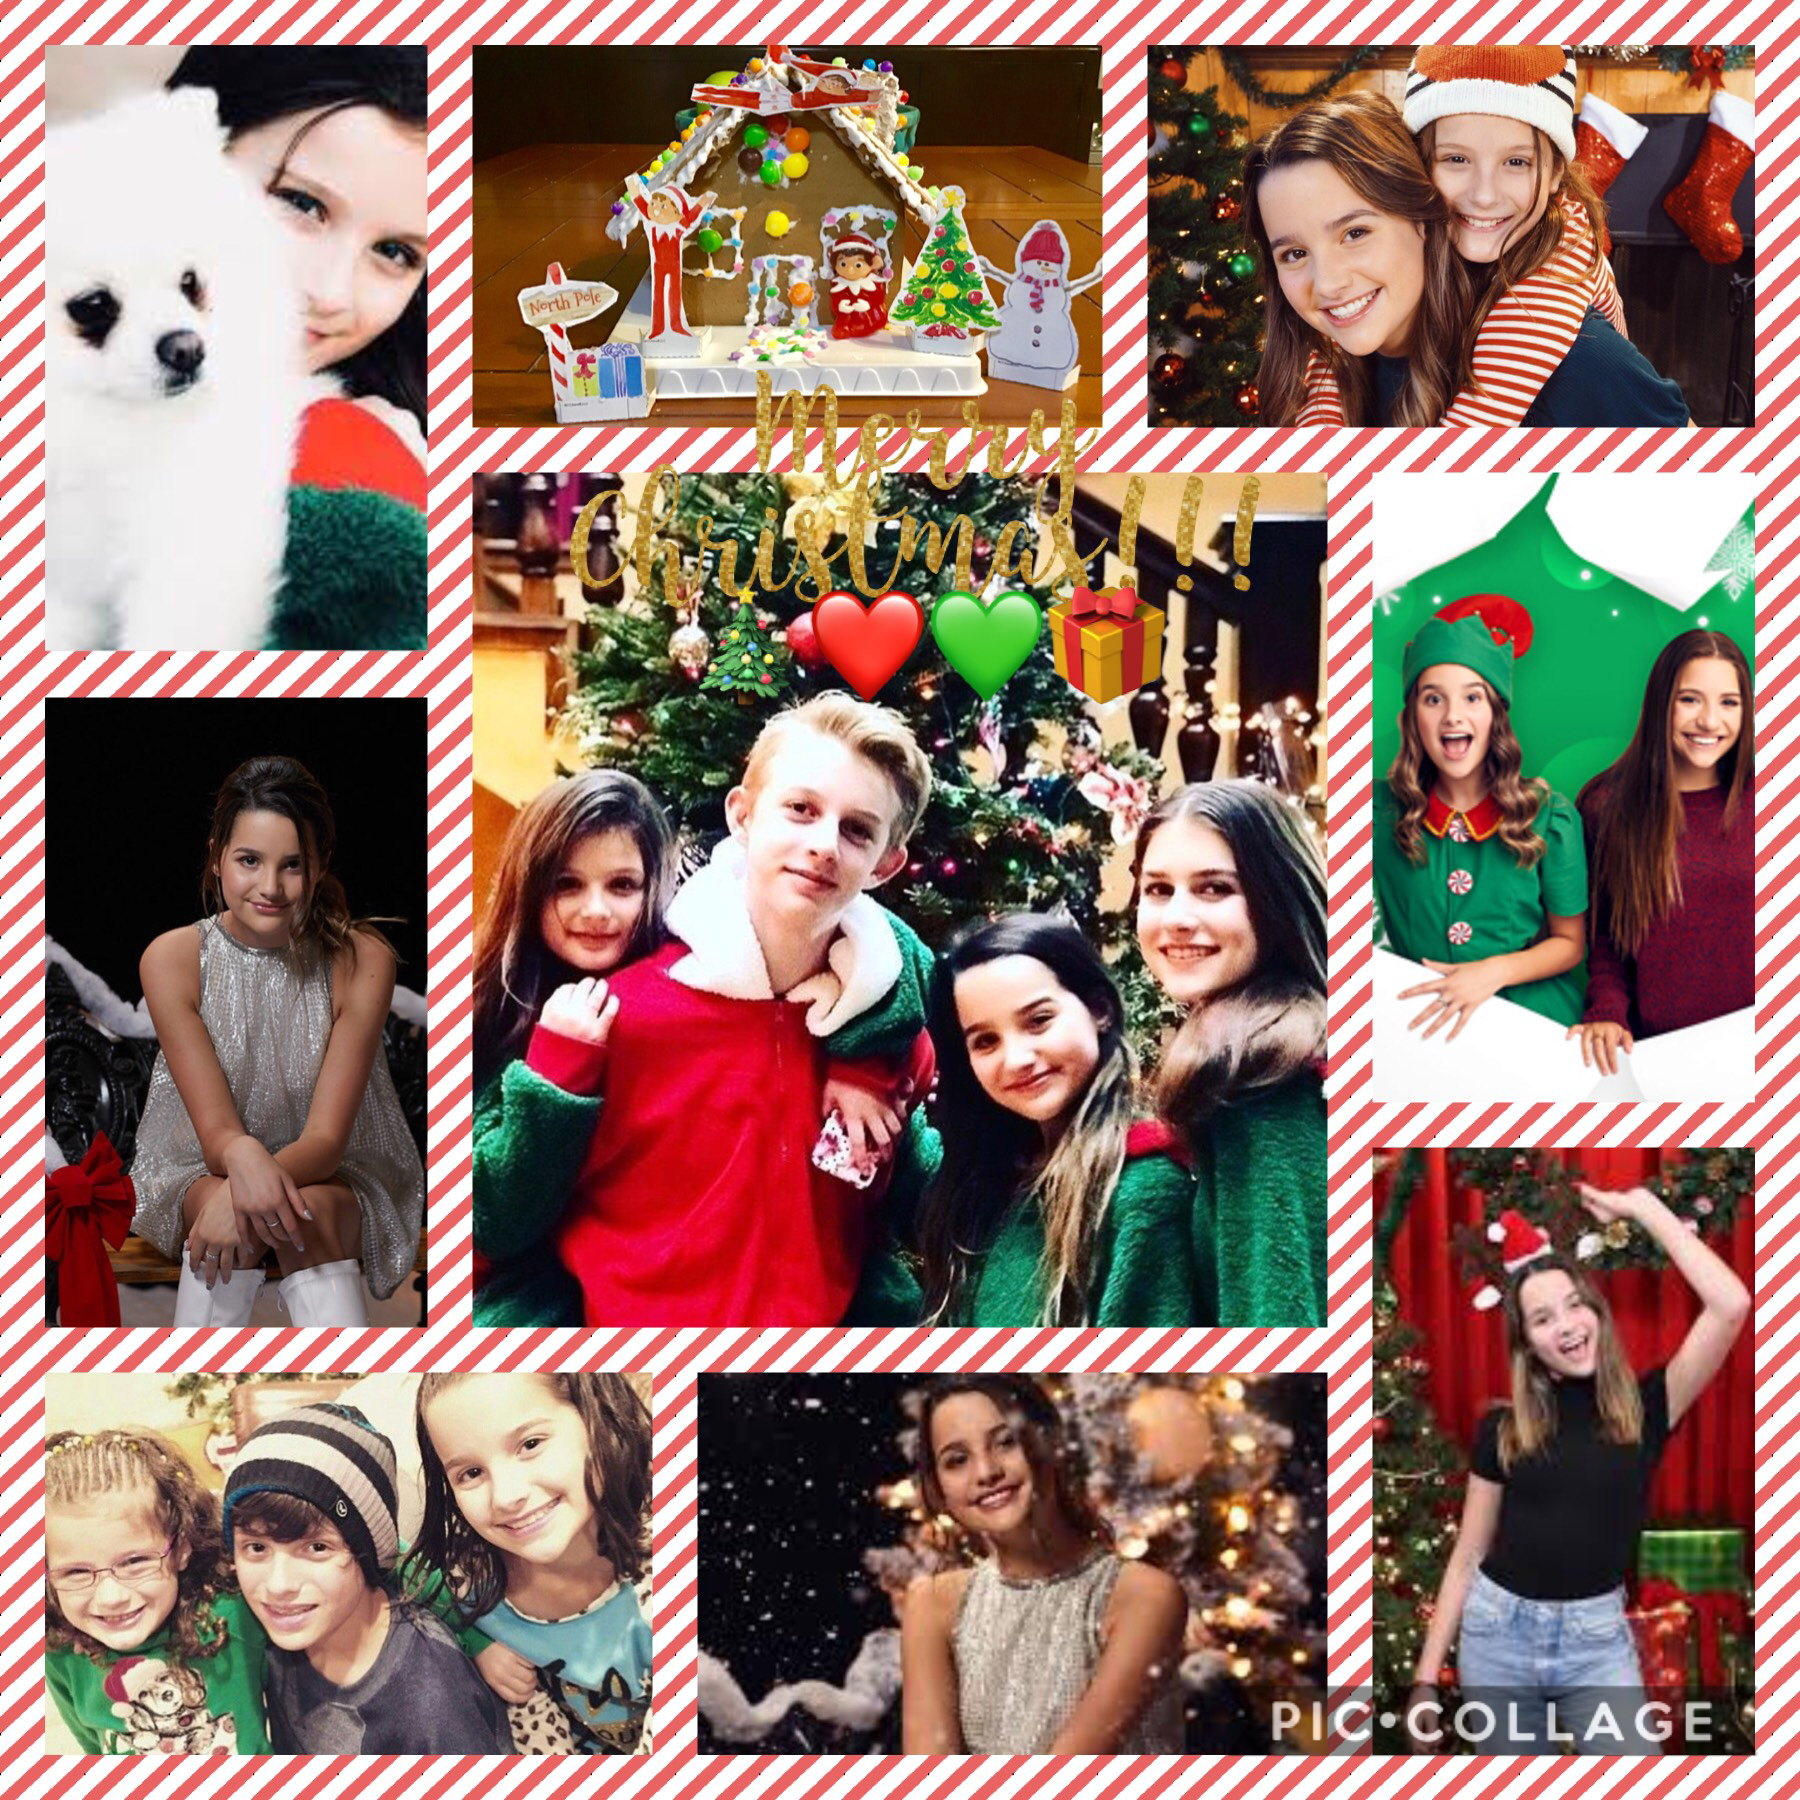 💚🎄Tap🎄💚
MERRY CHRISTMAS EVERYONE!!!!😆🎄🎁❤️💚❤️💚😘 Sry I’m a little late 😅 Thx 4 everything this year! ❤️💚 Also, can we just take a moment to congratulate ANNIE❤️👑 She’s accomplished so much this year, she’s amazing...ILY SM U ANNIE!!!❤️💚🎄👑🎁😍🥰😇 New Years is n